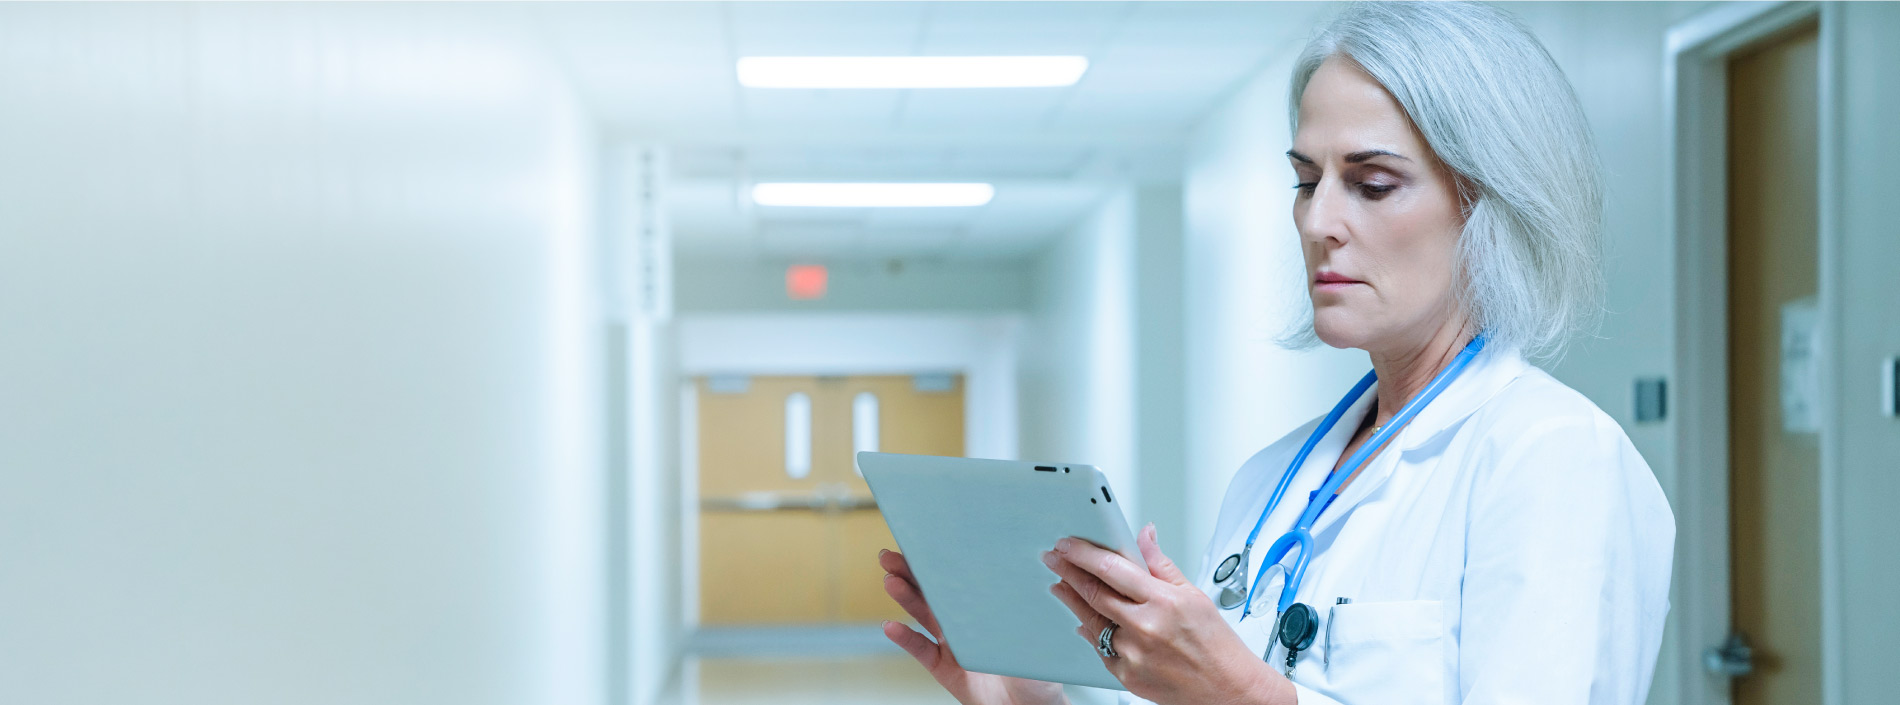 Female doctor standing in a hospital corridor and reviewing PAC Network Management data on a tablet device